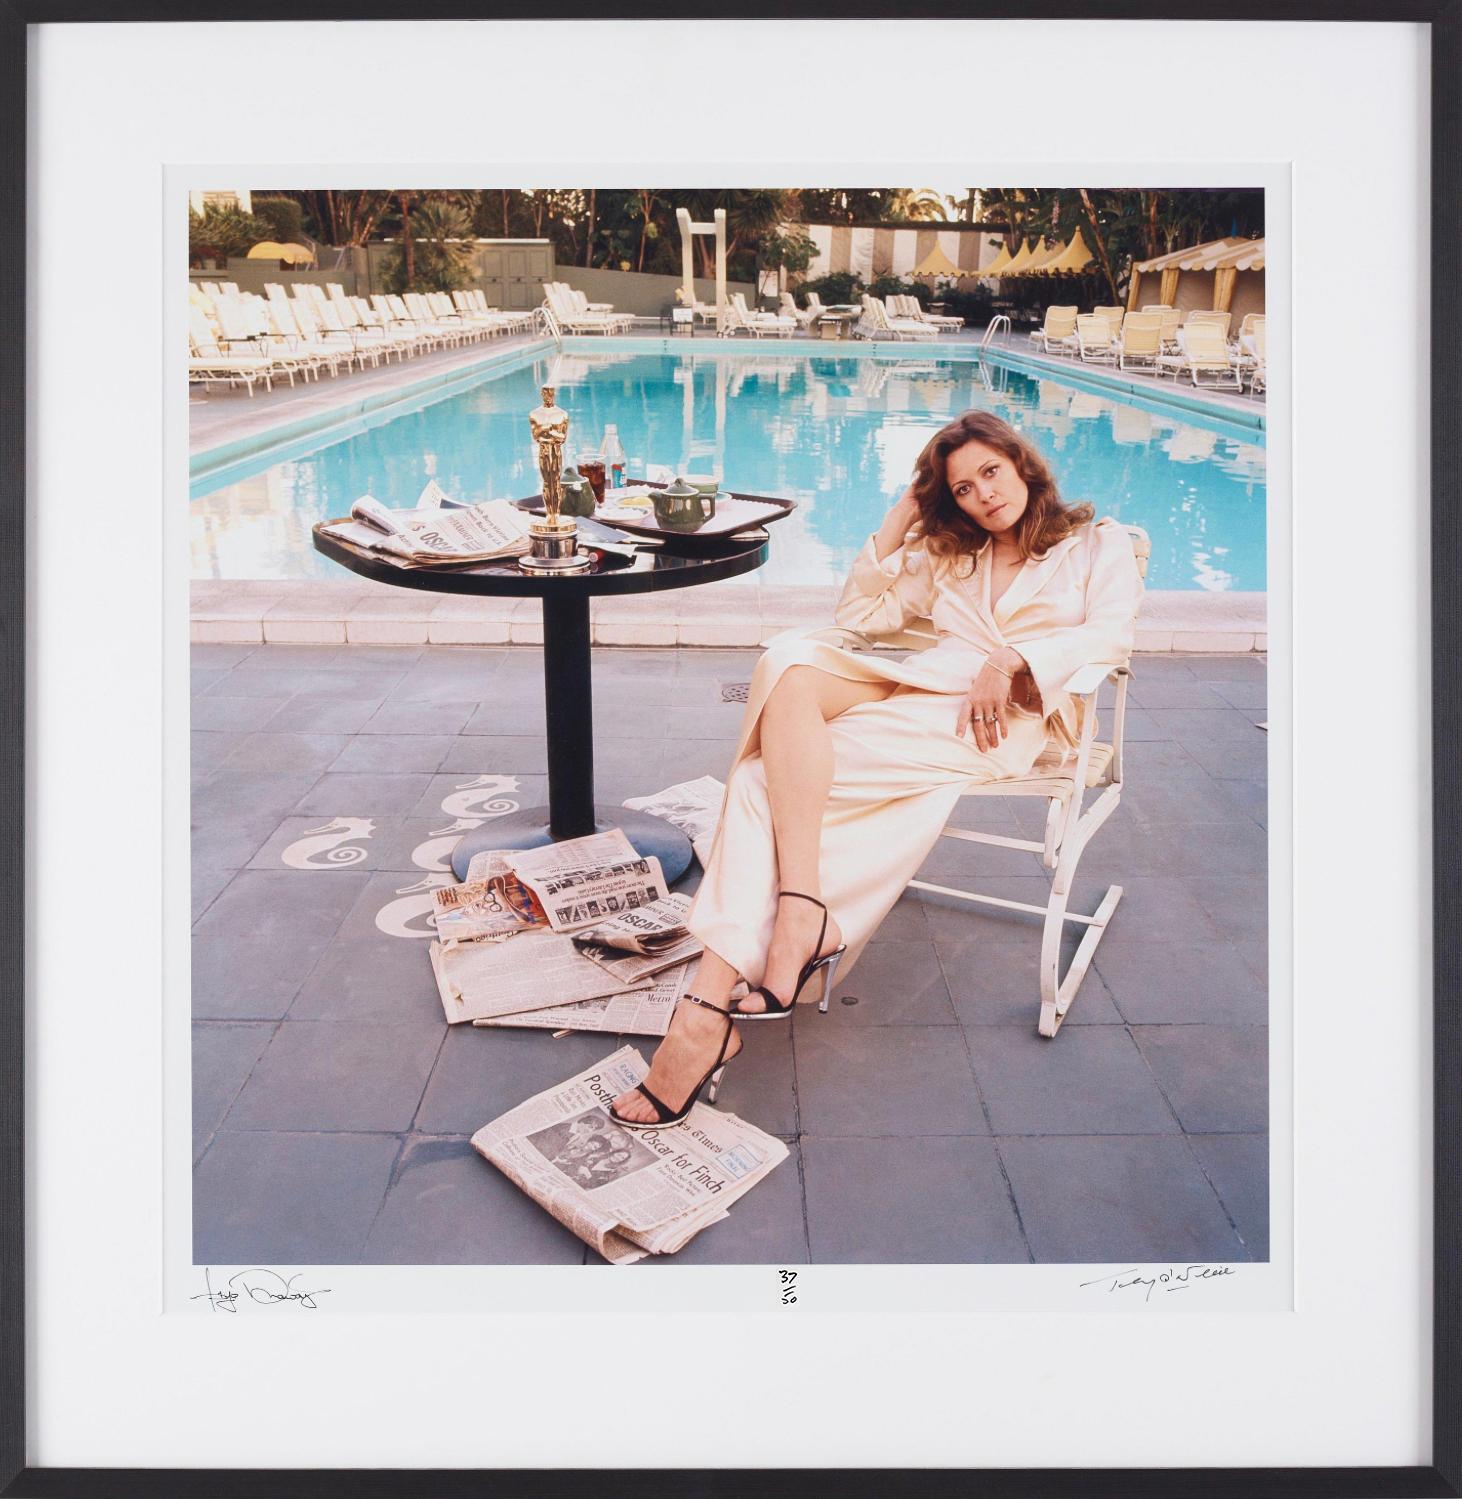 Faye Dunaway The Morning After, 1977  

Co-Signed Edition Print by Terry O'Neill and Faye Dunaway

Mint condition C print hand numbered 37 / 50 
and hand signed by both photographer and film star.


Framed in black solid wood frame with matting and